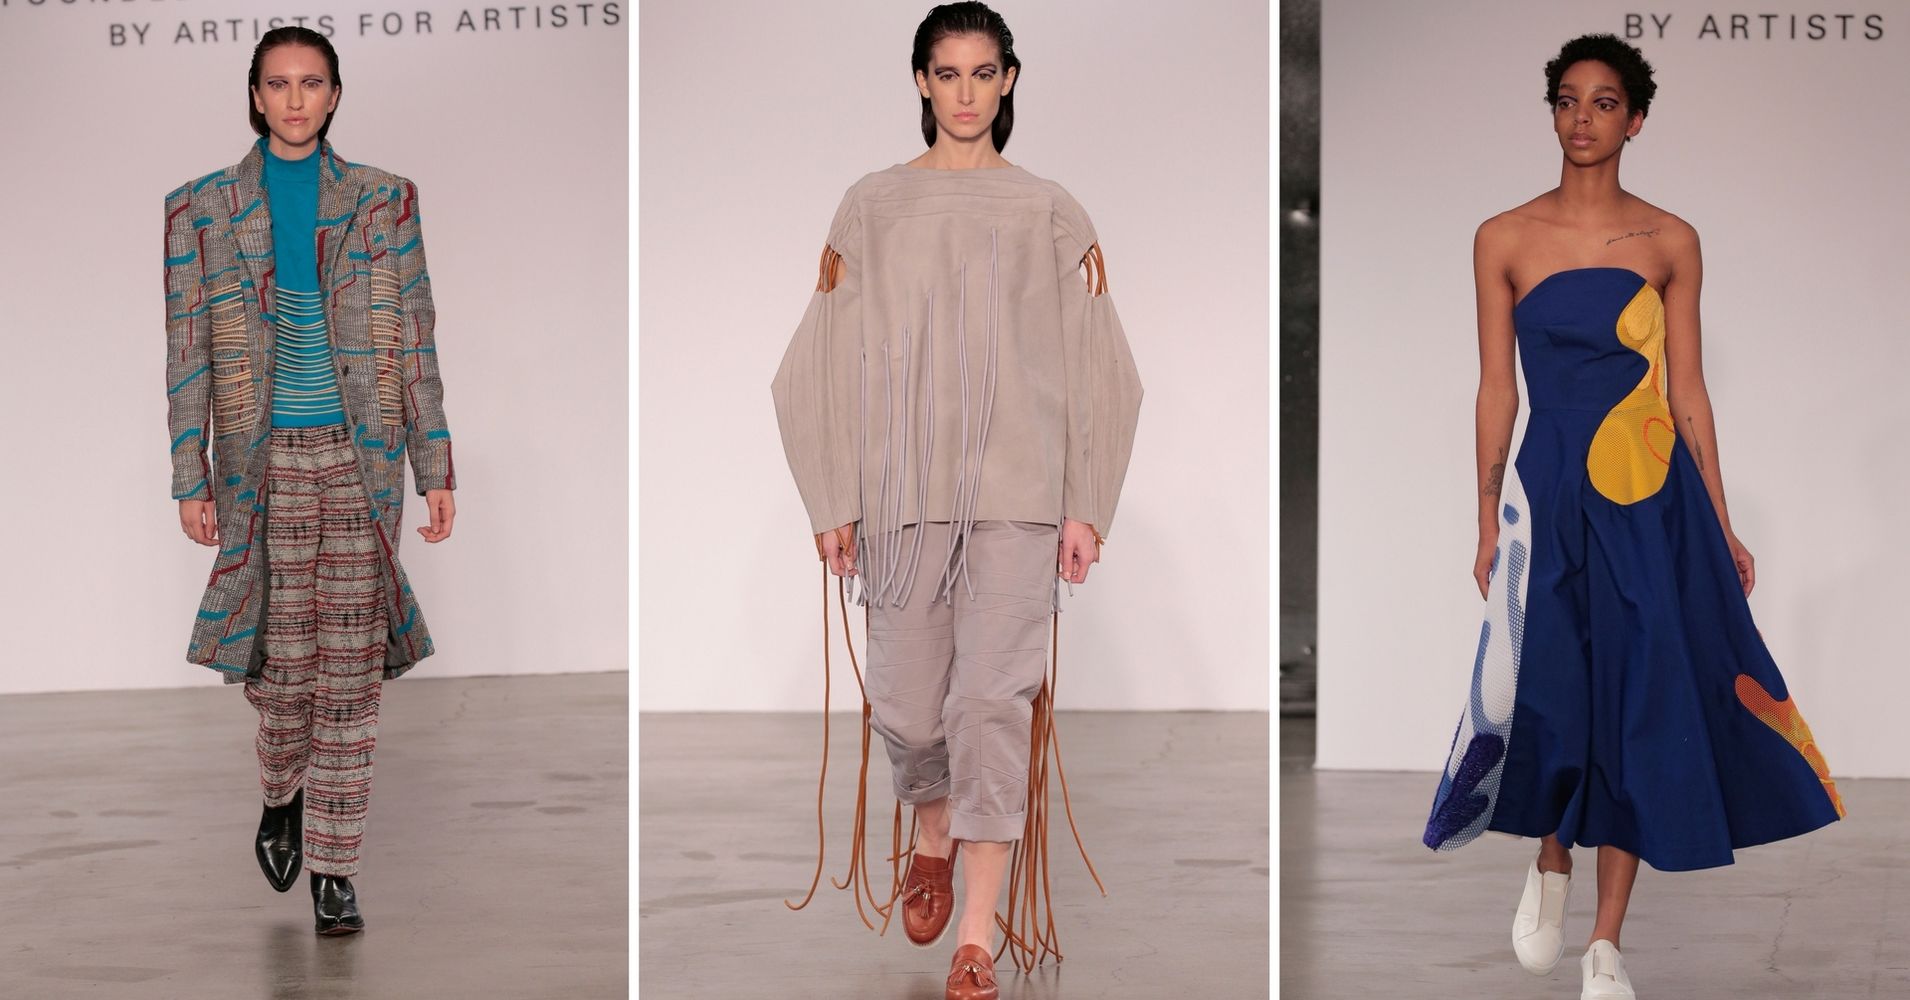 Putting on a Show, San Francisco's Emerging Designers Graduate in Style